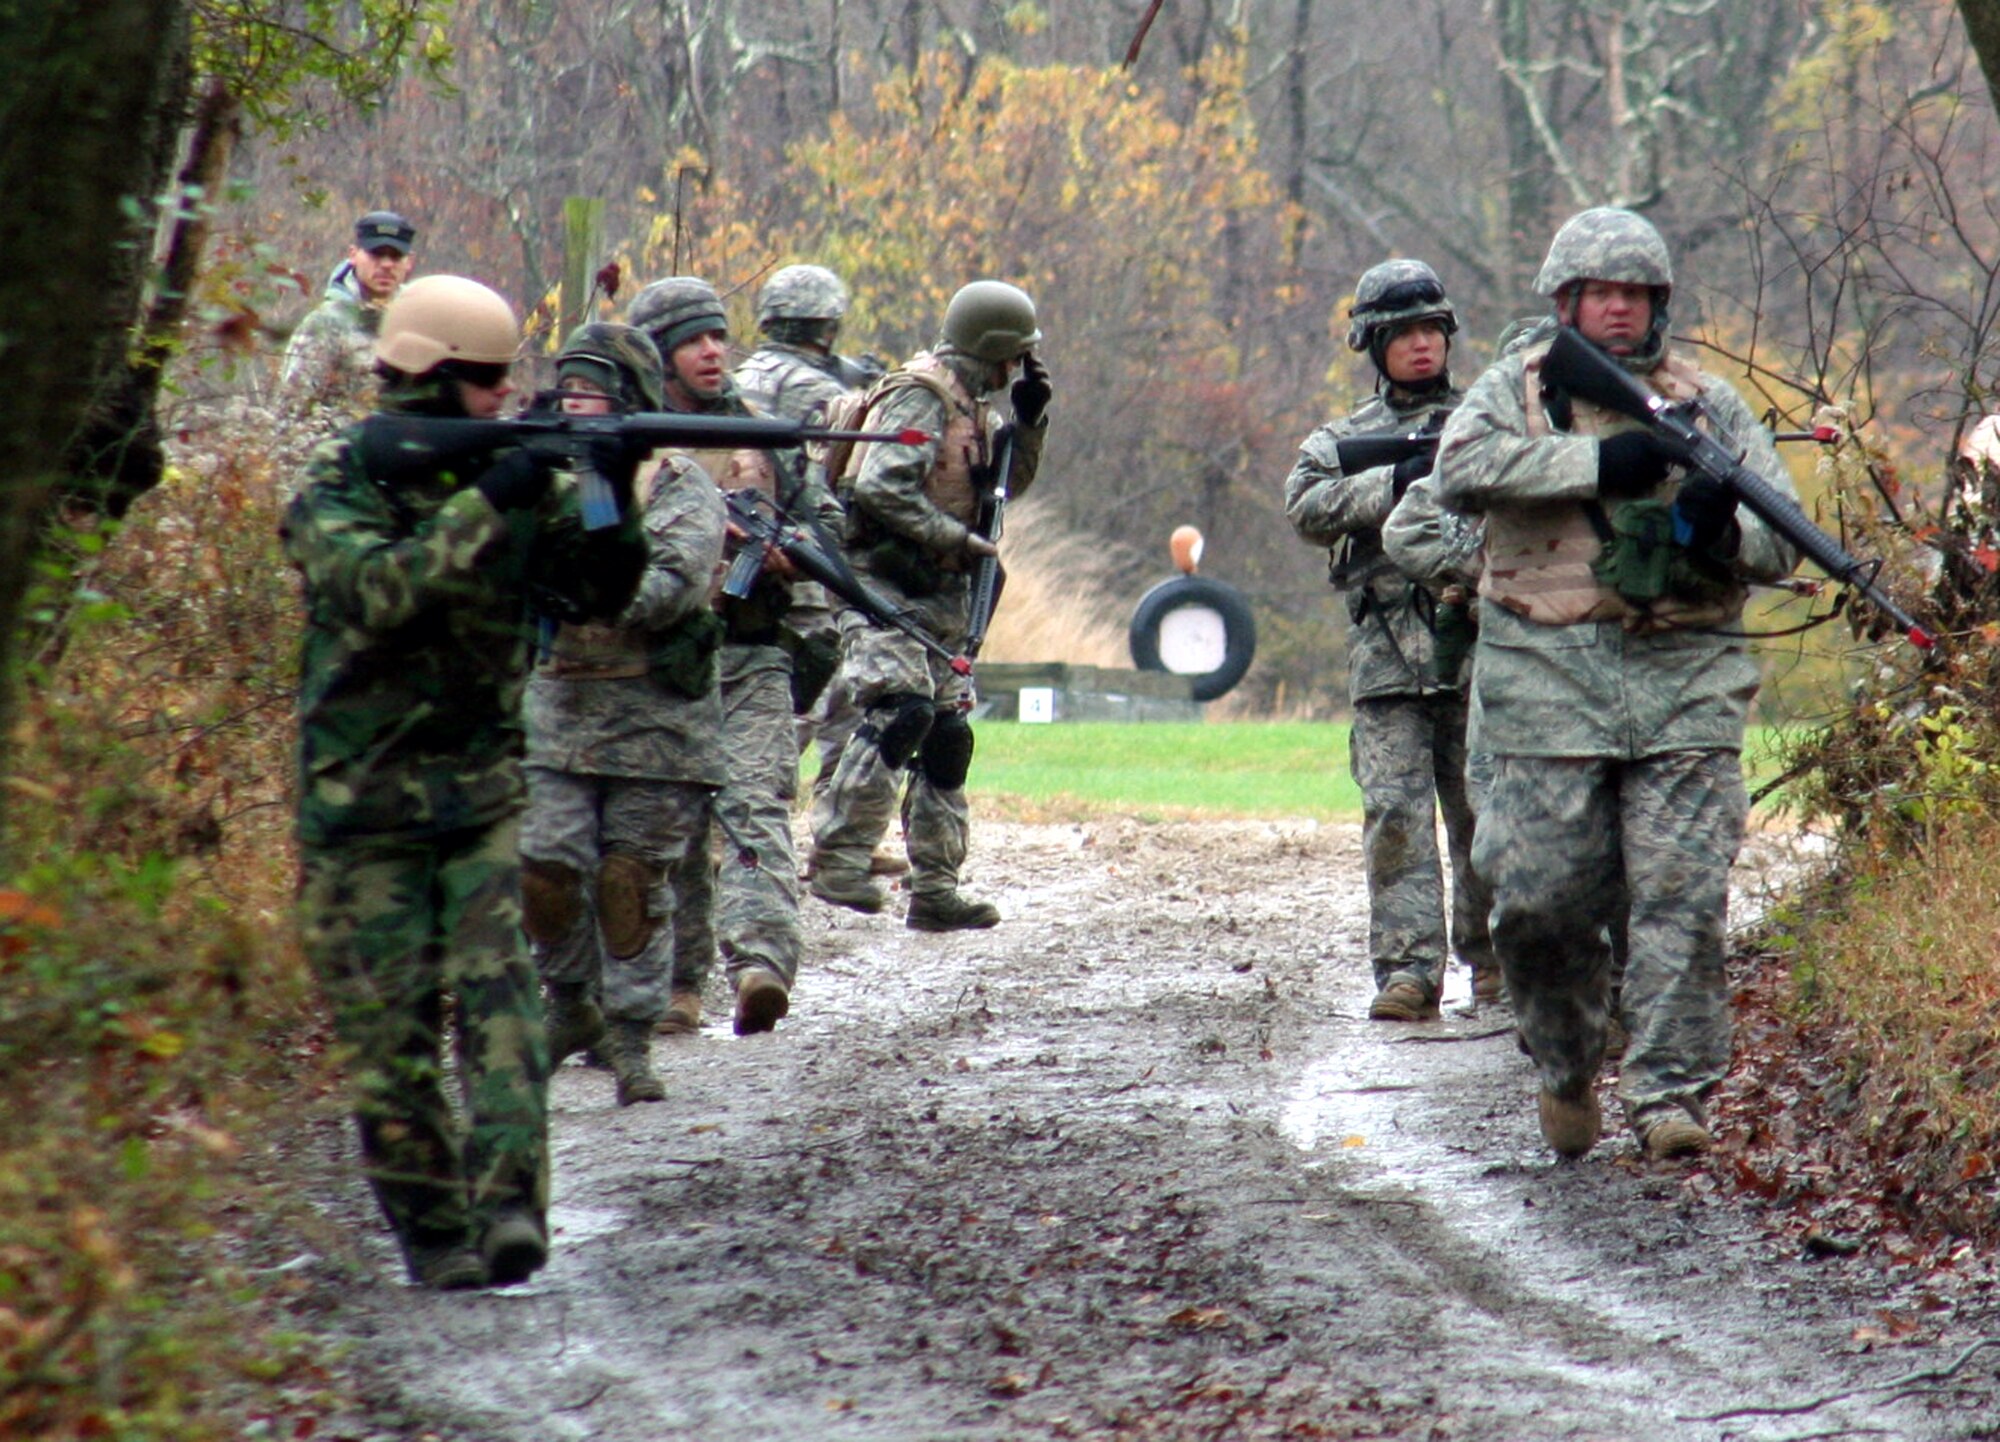 Students in the Combat Airman Skills Training Course 10-1A practices dismounted patrolling tactics during course training on Nov. 12, 2009, on a range at Joint Base McGuire-Dix-Lakehurst, N.J.  The course, taught by the U.S. Air Force Expeditionary Center's 421st Combat Training Squadron, prepares Airmen for upcoming deployments.  (U.S. Air Force Photo/Tech. Sgt. Scott T. Sturkol)